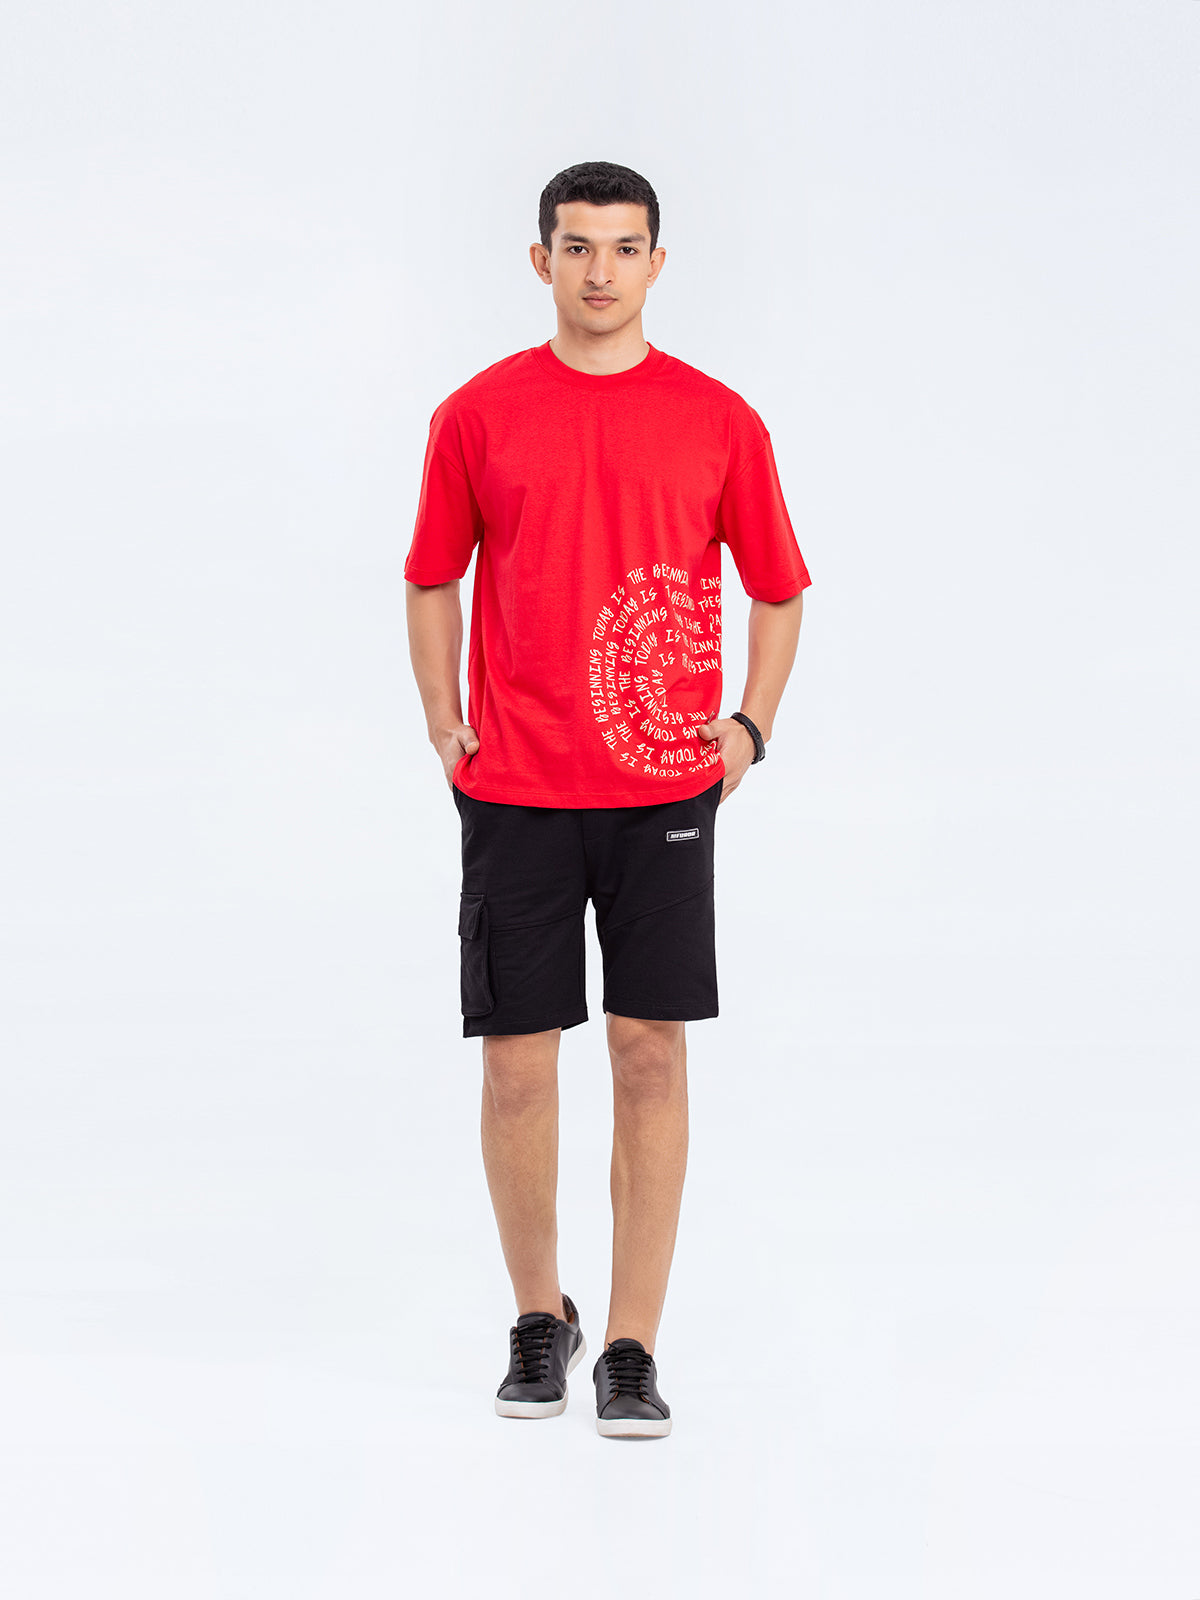 Relaxed Fit Graphic Tee - FMTGT24-073